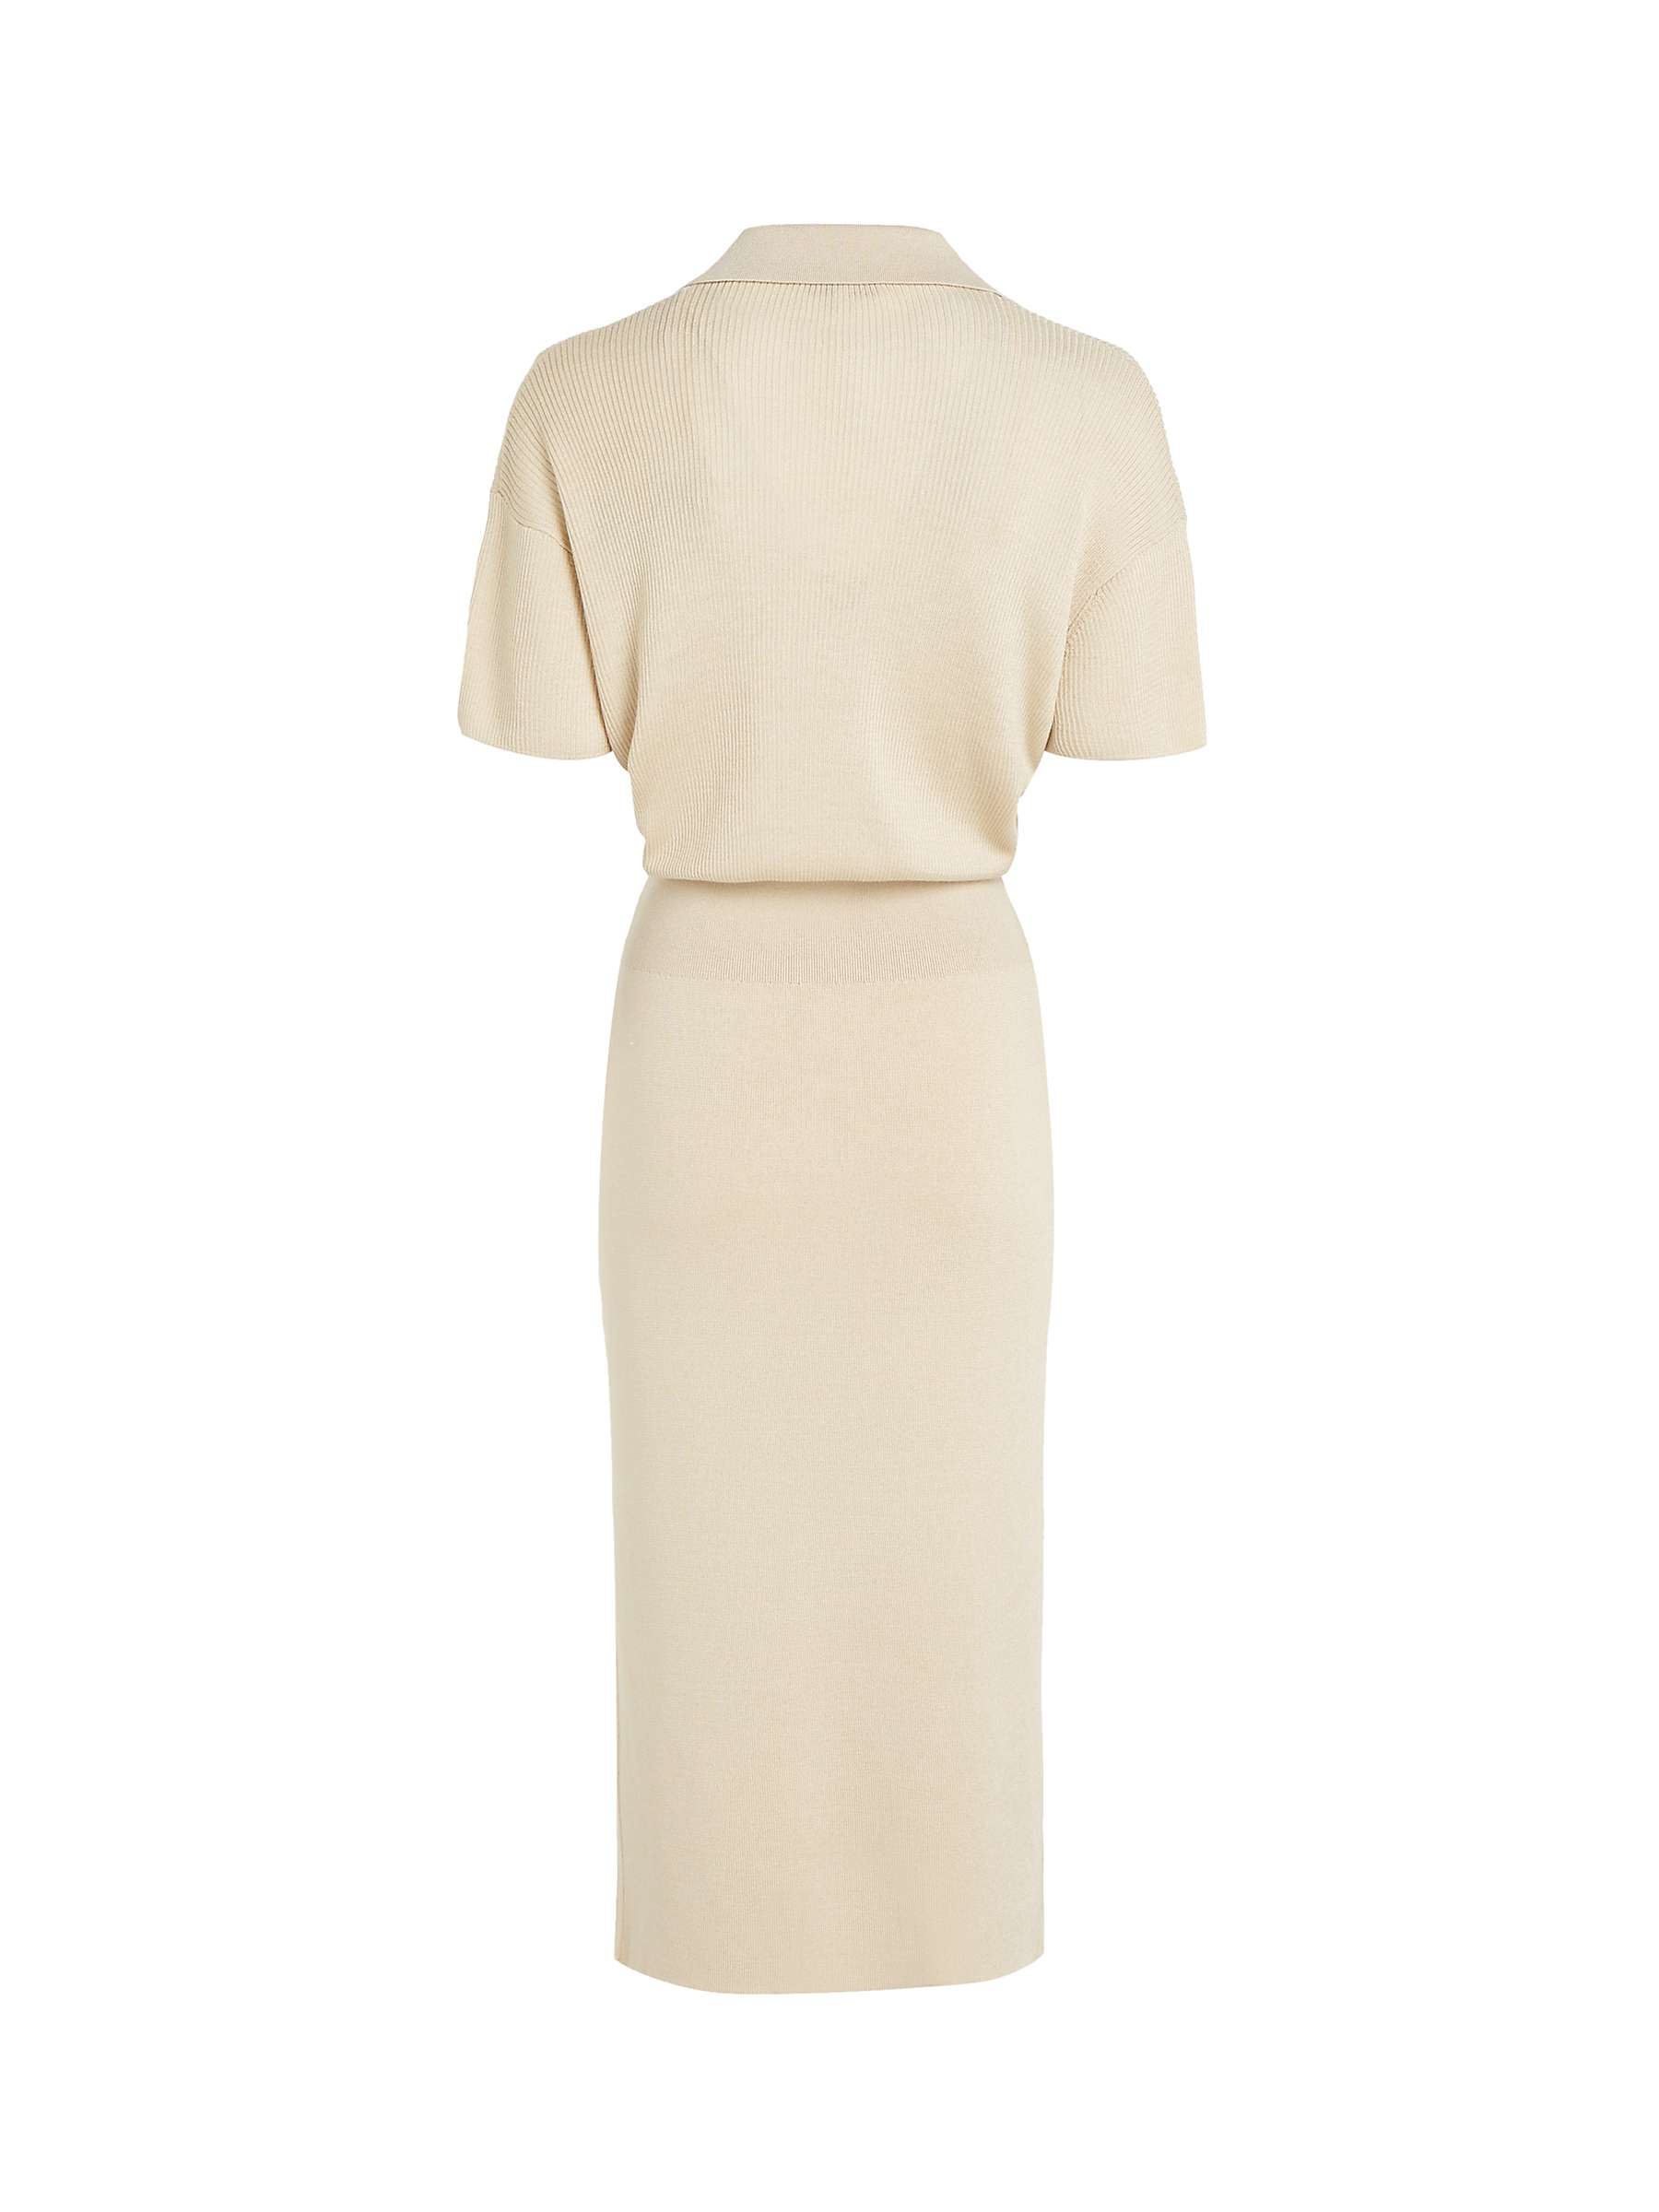 Buy Tommy Hilfiger Polo Midi Dress, Classic Beige Online at johnlewis.com